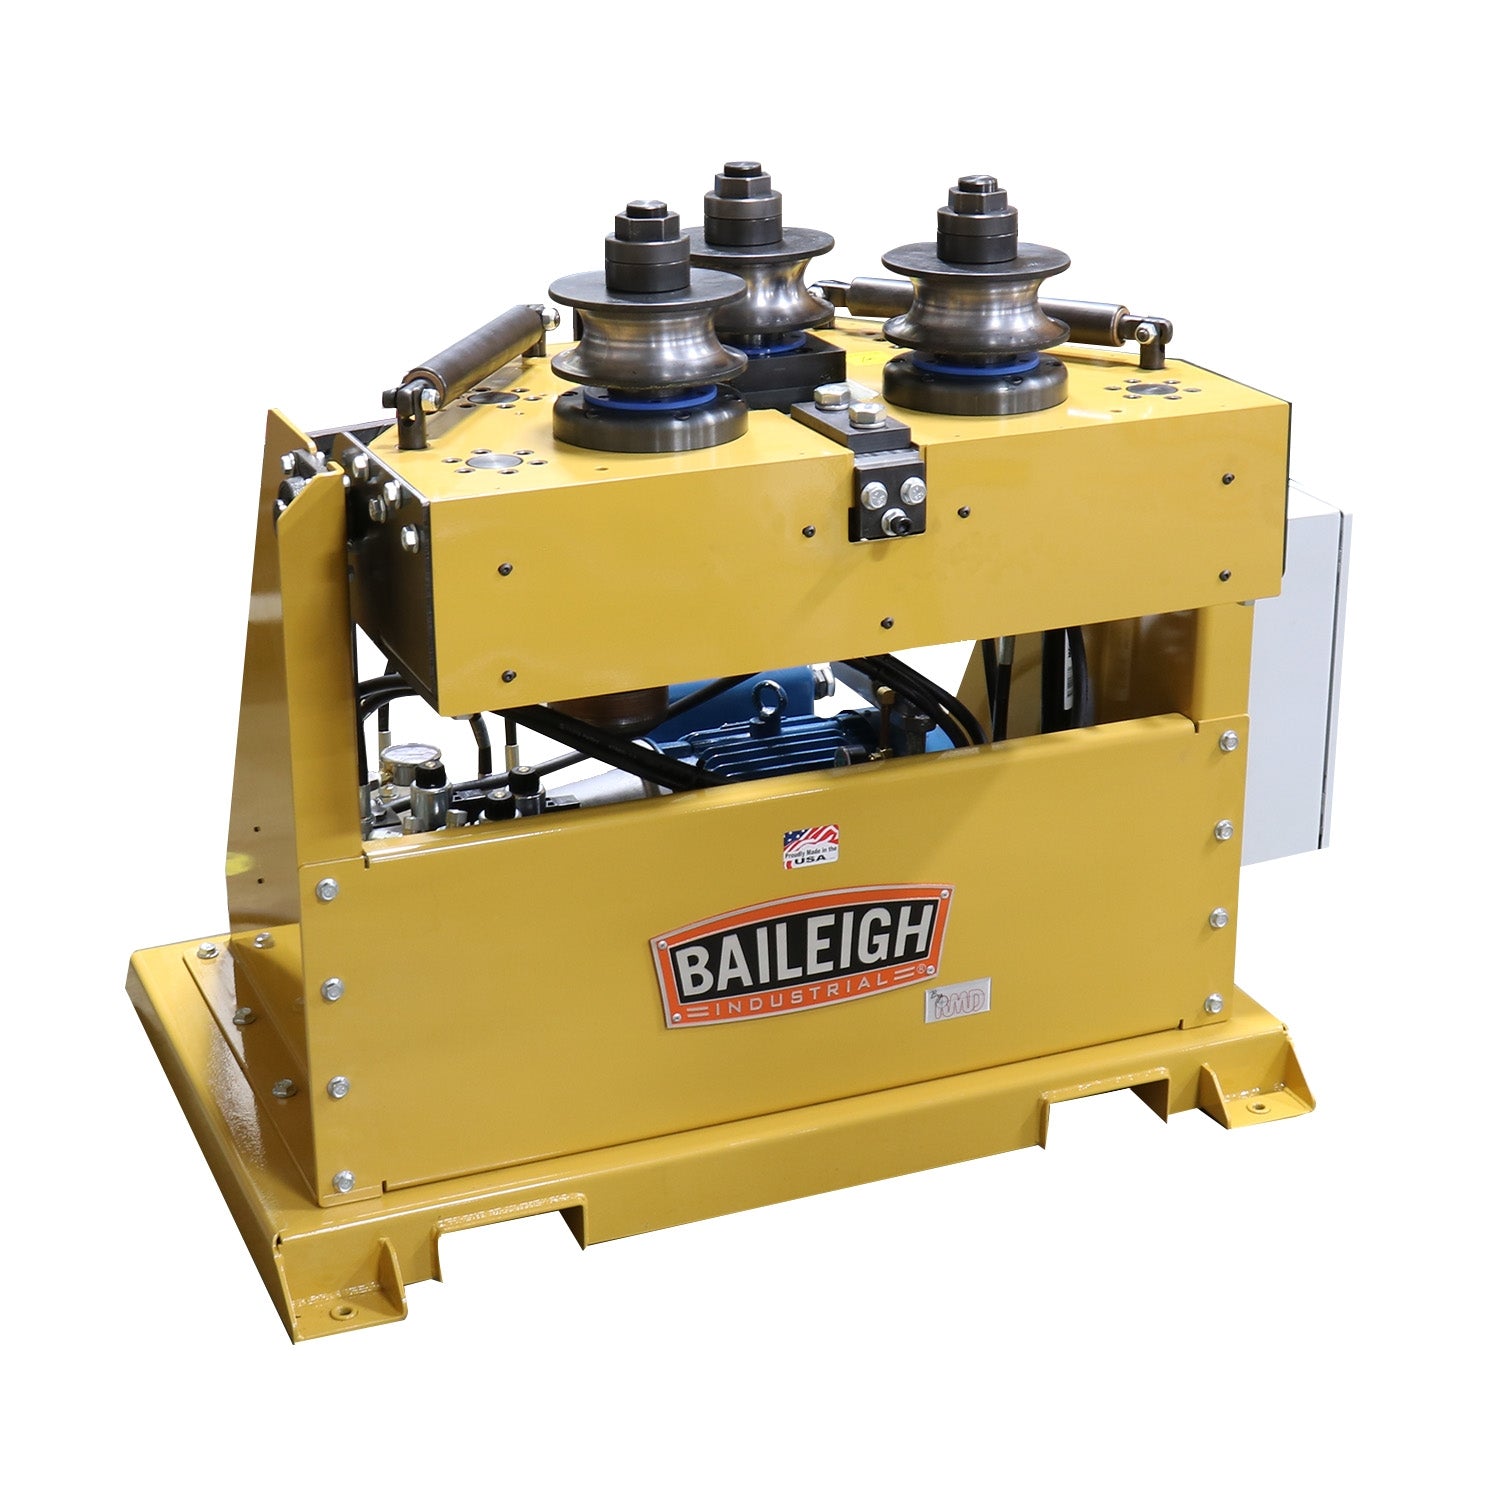 Baileigh R-H60-HD 220V 1 Phase Roll Bender with Hydraulic Drive, Top Roll and Tilt 2.5" Shedule 40 Capacity